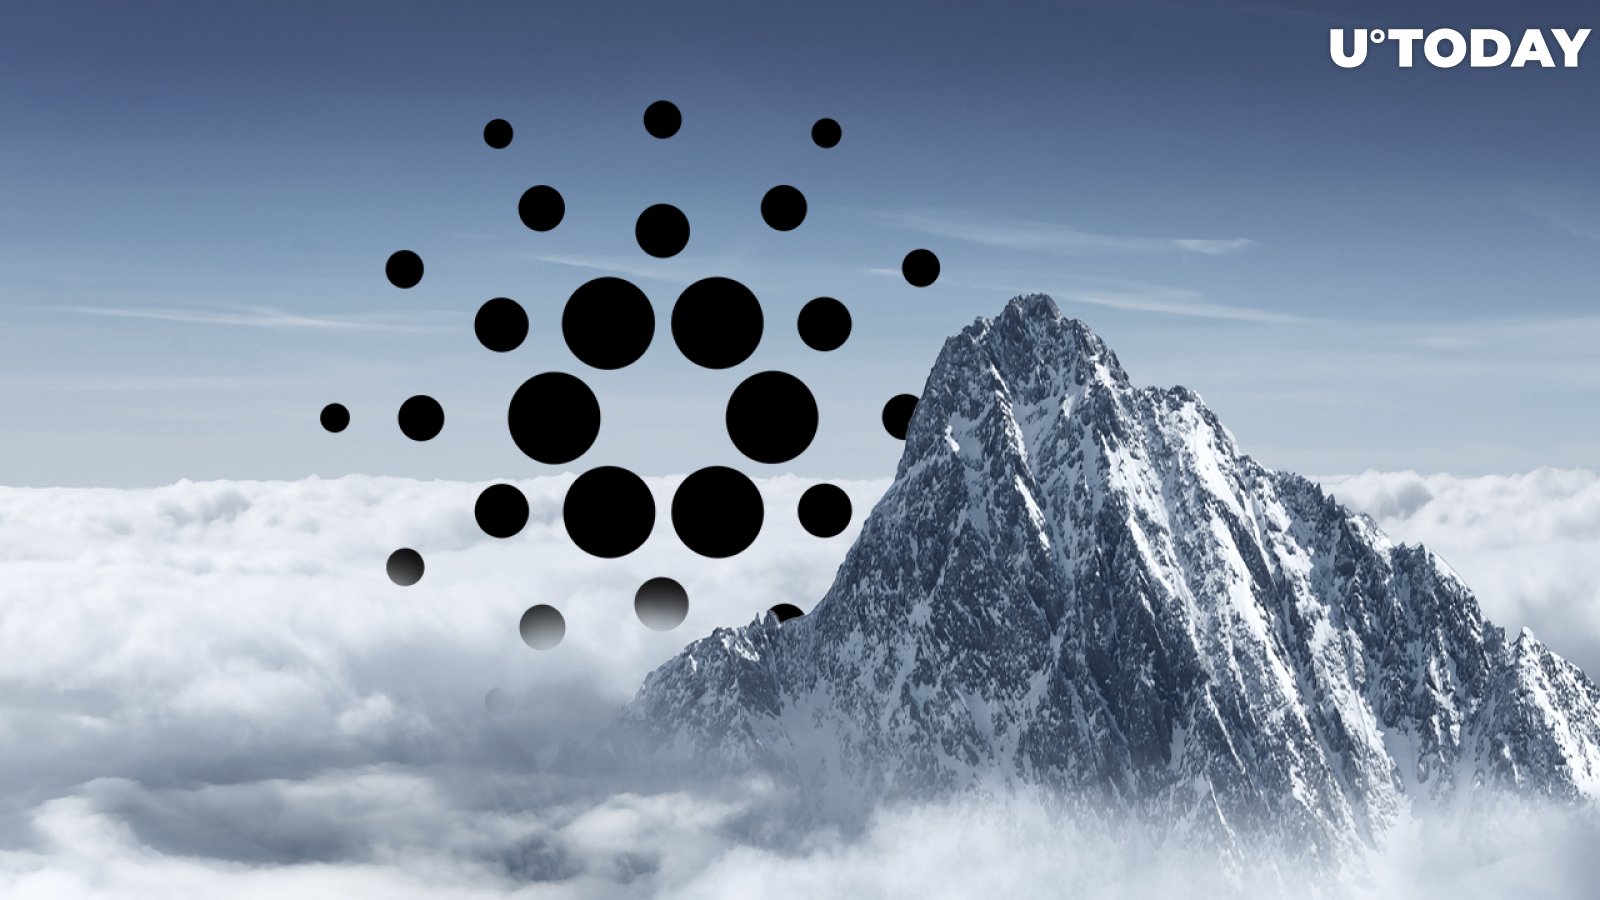 Cardano Flag Now on Mount Everest as ADA Price Rises by 4%